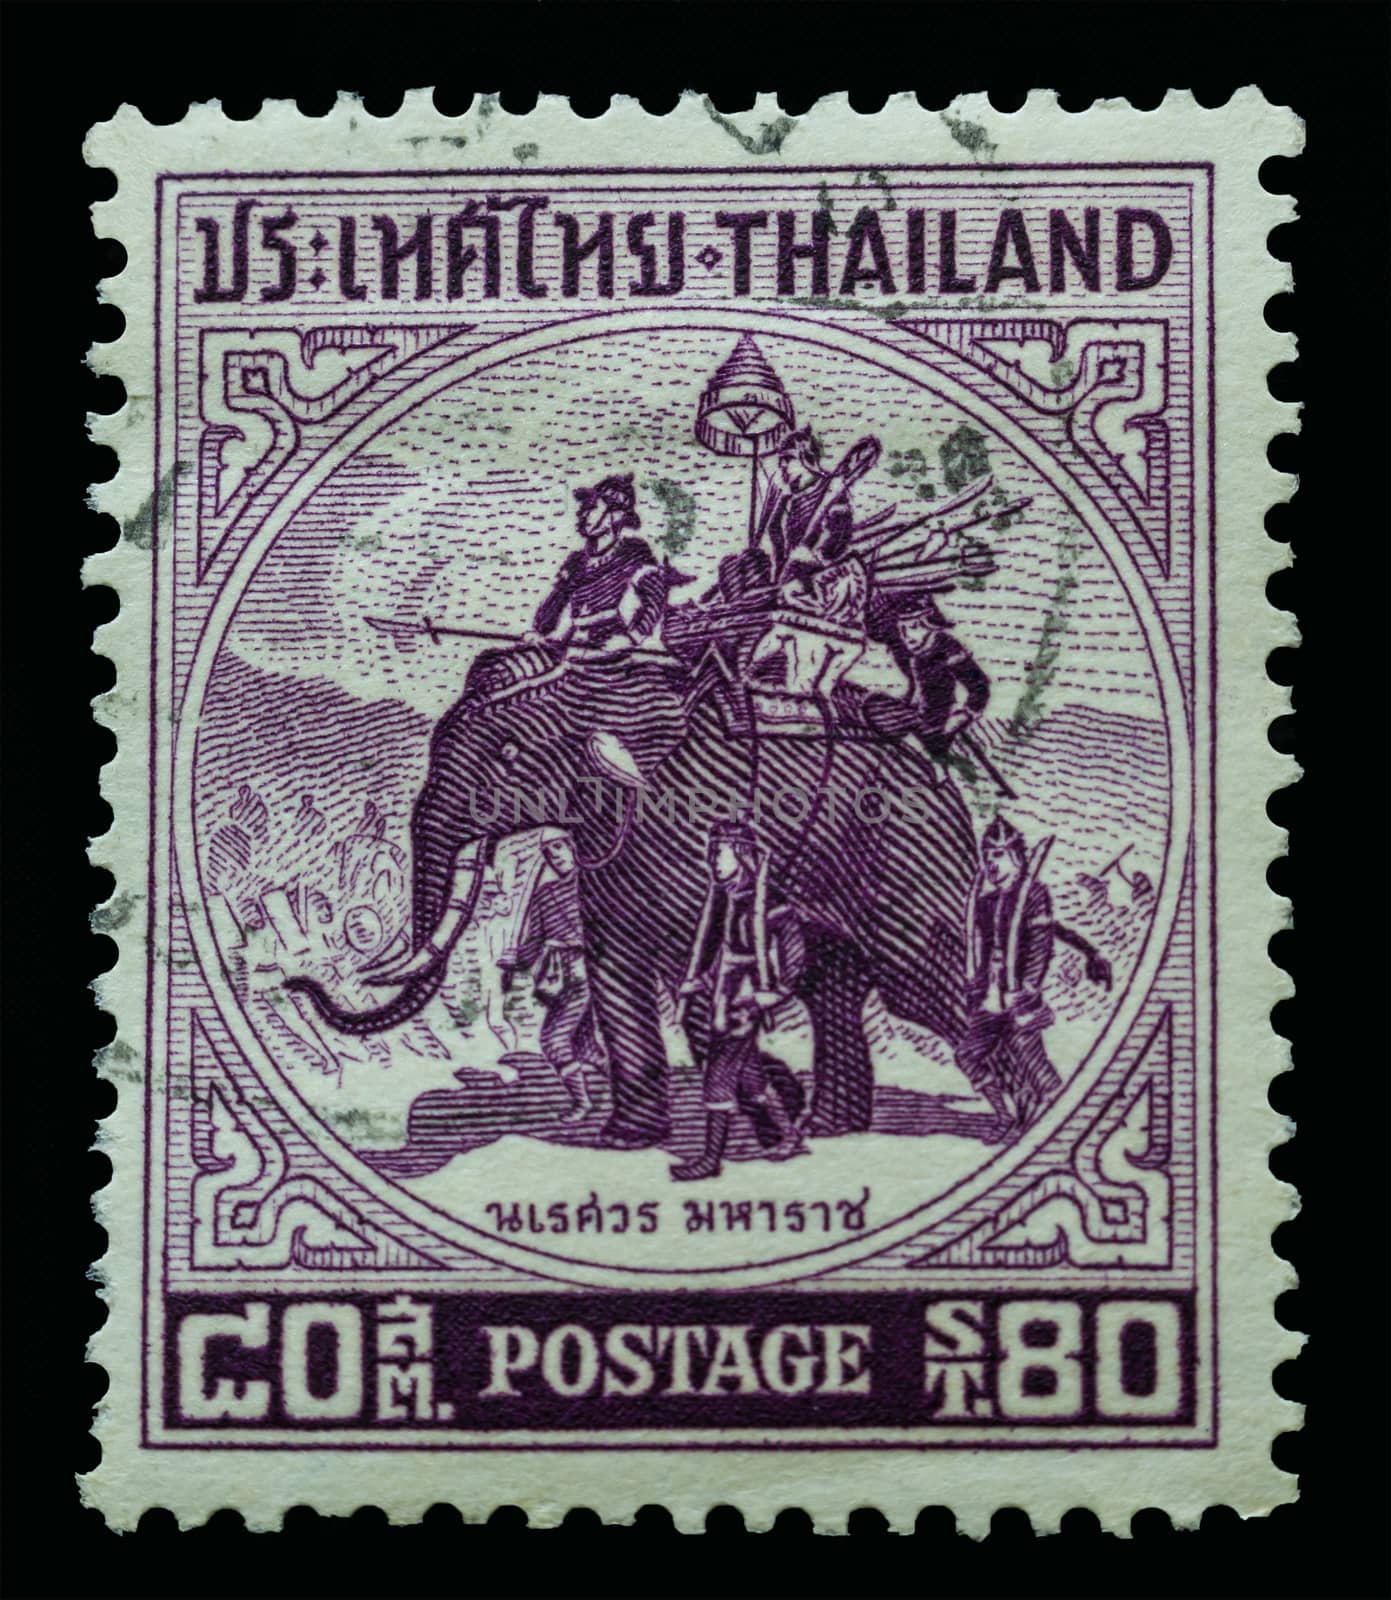 THAILAND - CIRCA 1955: Old Stamp Features Thai King Naresuan (1590-1605) Riding On Elephant Sword Handle From The Series "King Naresuan", Thailand, Circa 1955.